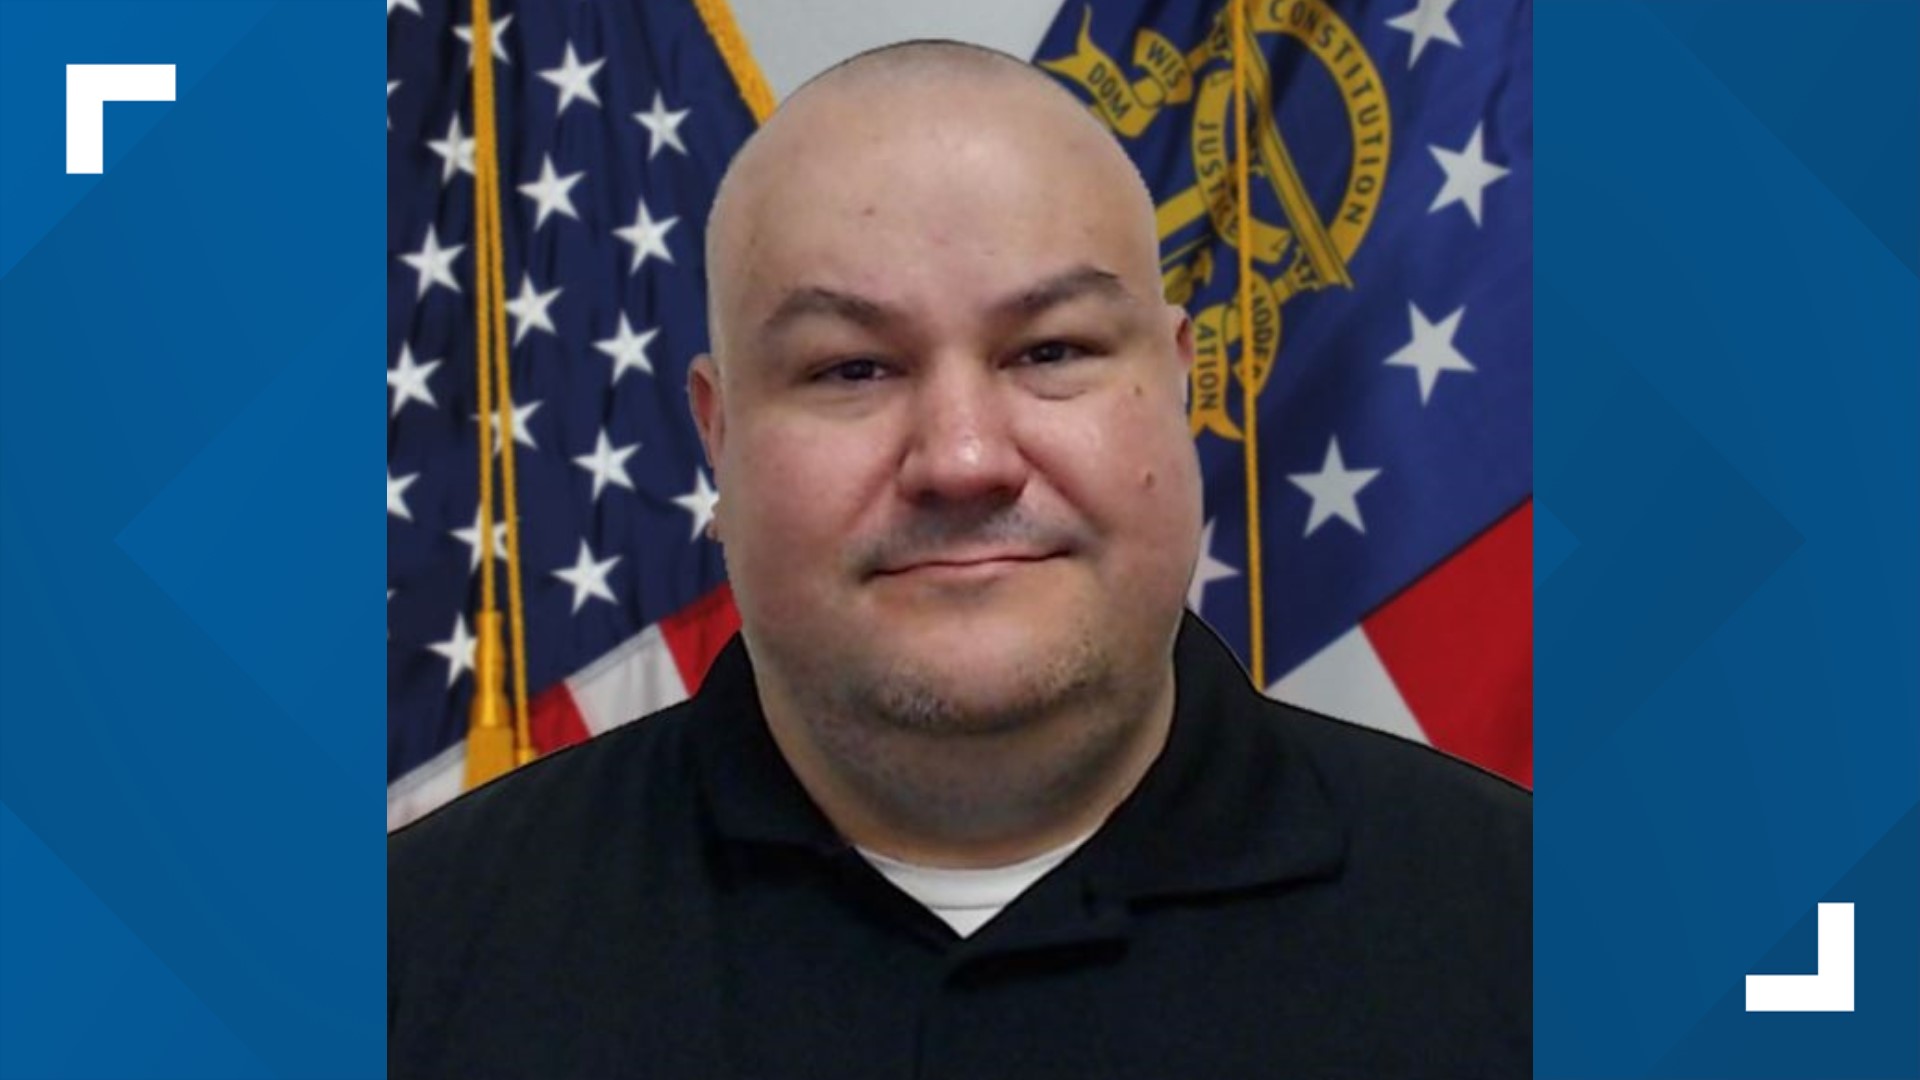 Correctional Officer Robert Clark was killed in what the Department of Corrections described as an assault from behind with a homemade weapon.